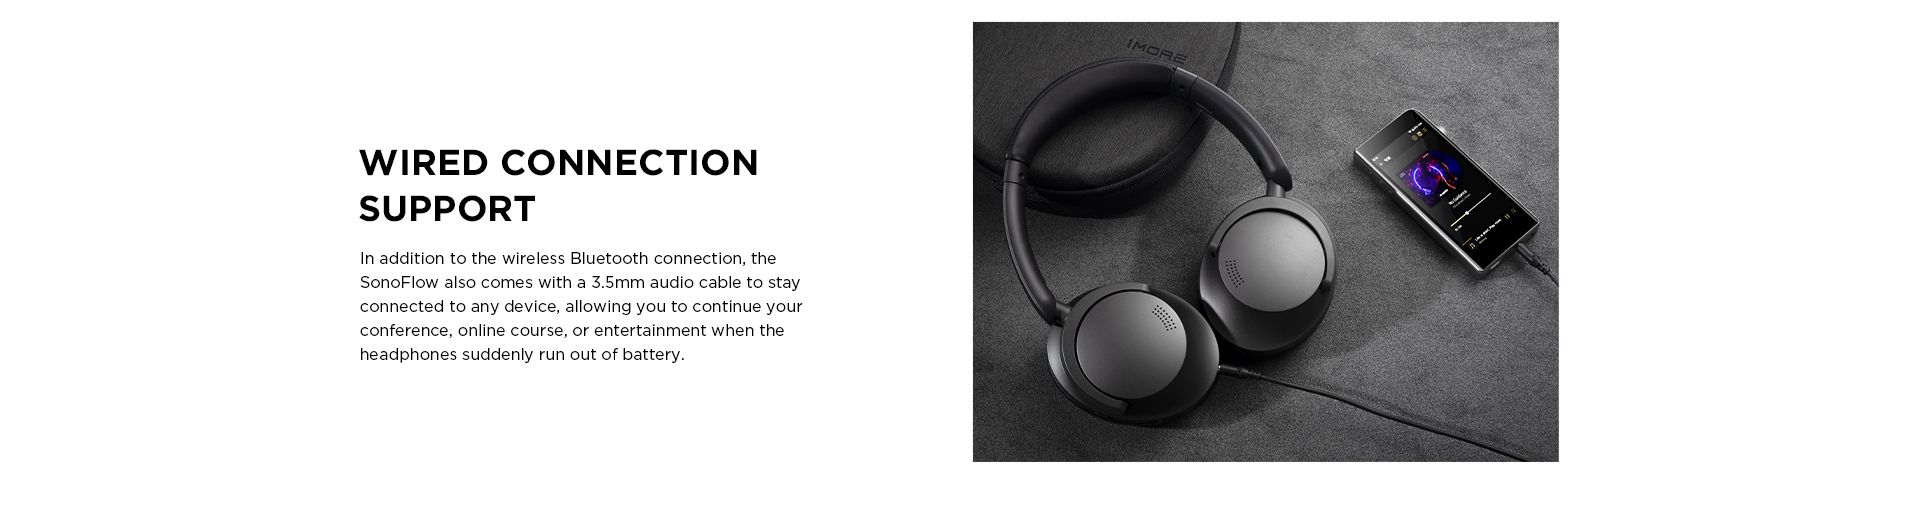 1MORE-SonoFlow-Active-Noise-Cancelling-Headphones-Bluetooth-Headphones-with-LDAC-for-Hi-Res-Wireless-Audio-70H-Playtime-Clear-Calls-Blue-25